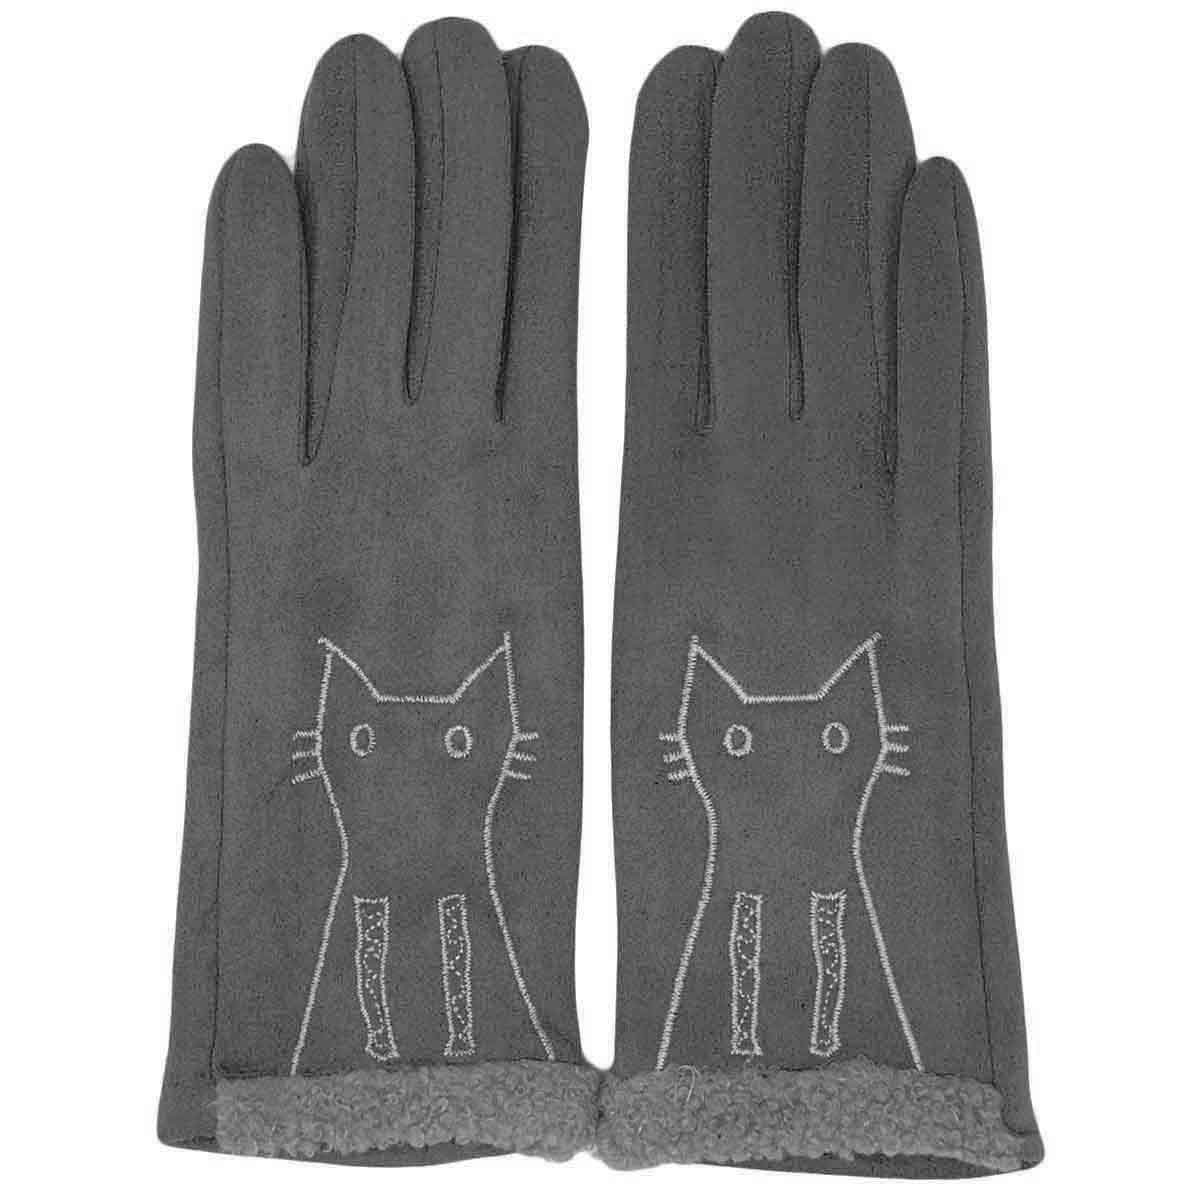 1224 - Grey Cat Silhouette<br>
Touch Screen Smart Gloves